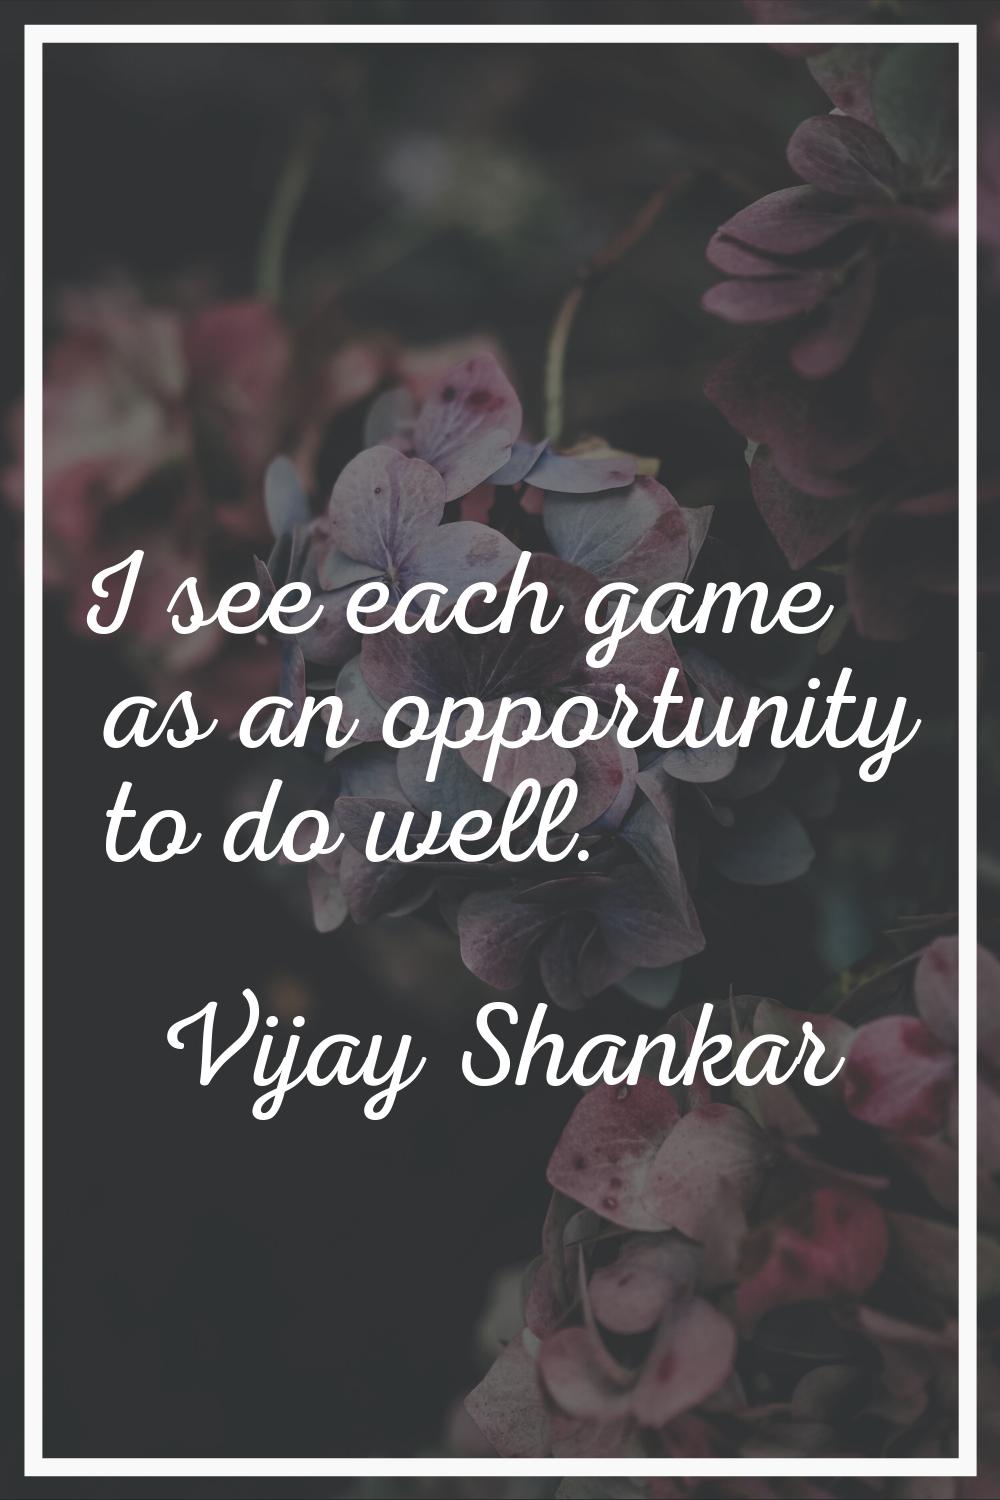 I see each game as an opportunity to do well.